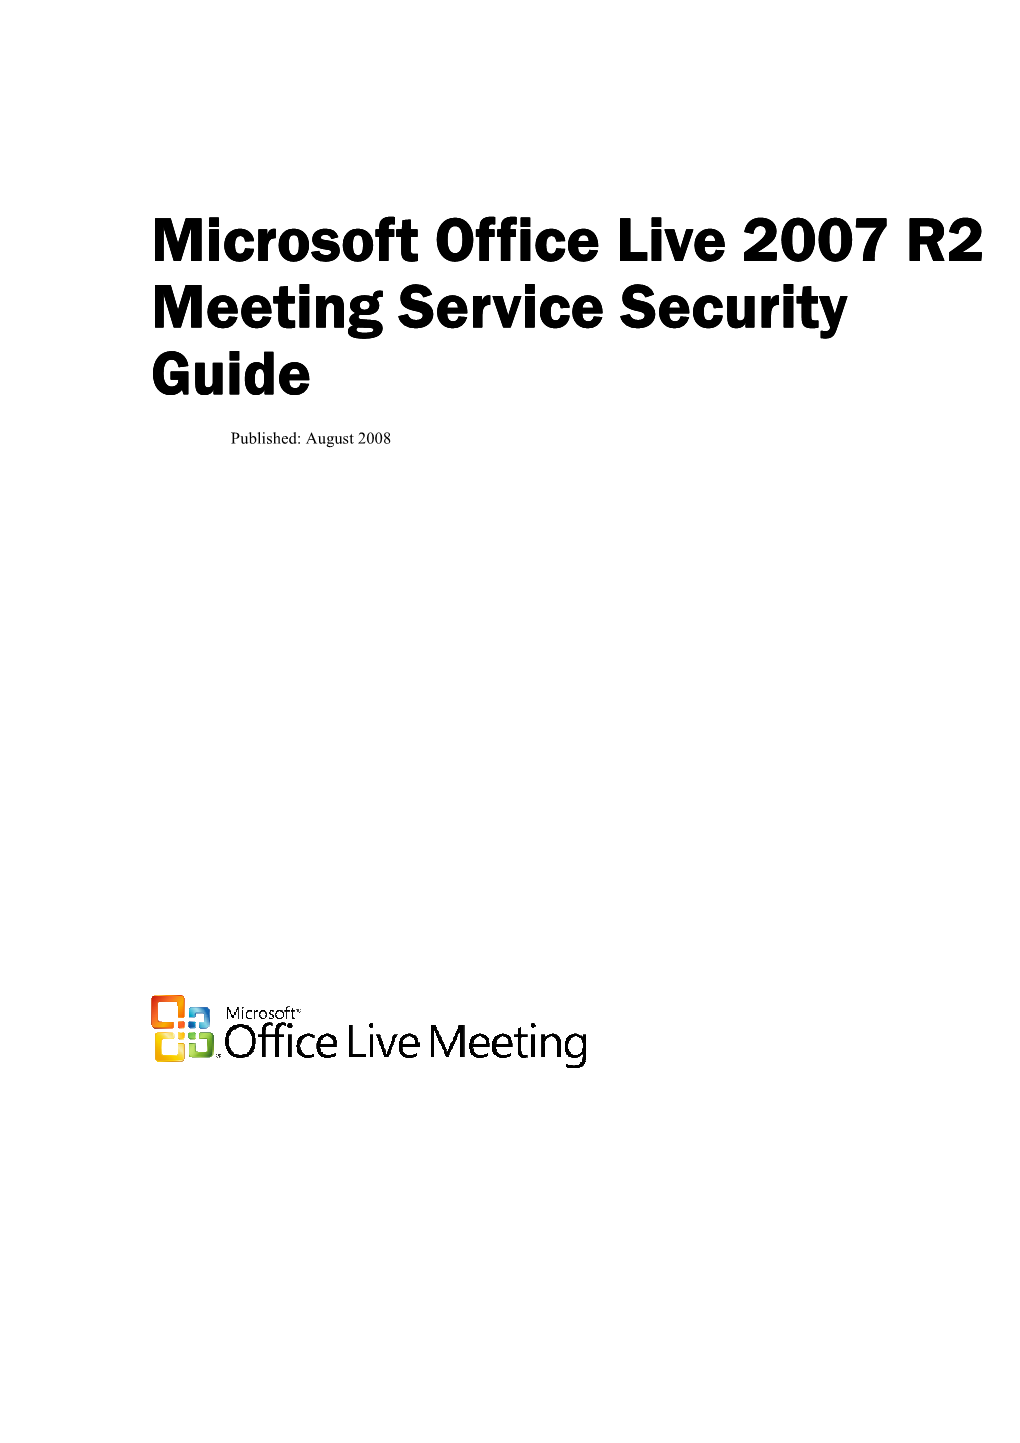 Microsoft Office Live Meeting Service Security Guide.Pdf